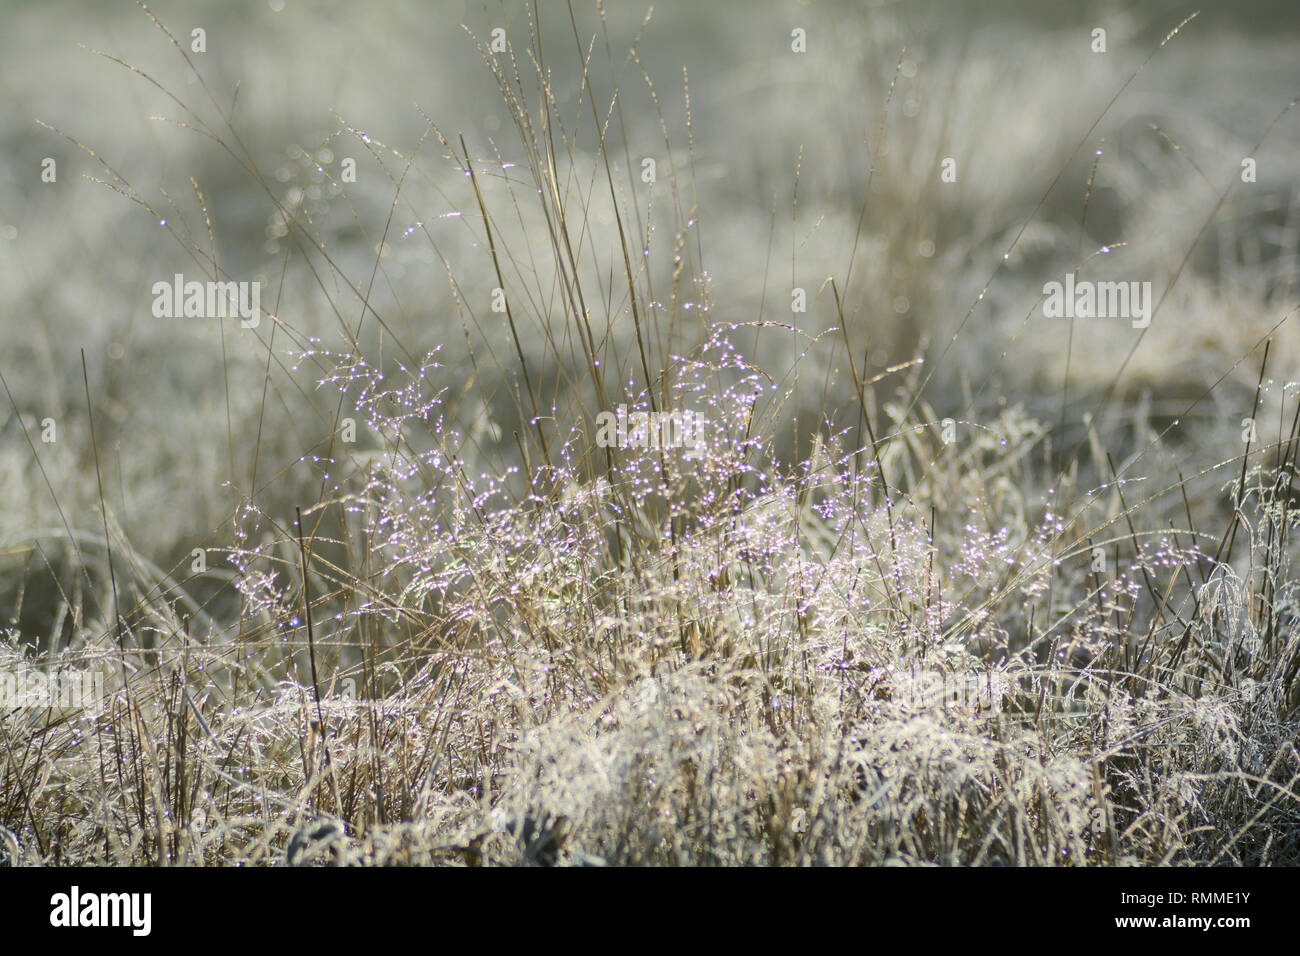 Early morning dew on a tall fescue grass (Festuca arundinacea) Stock Photo